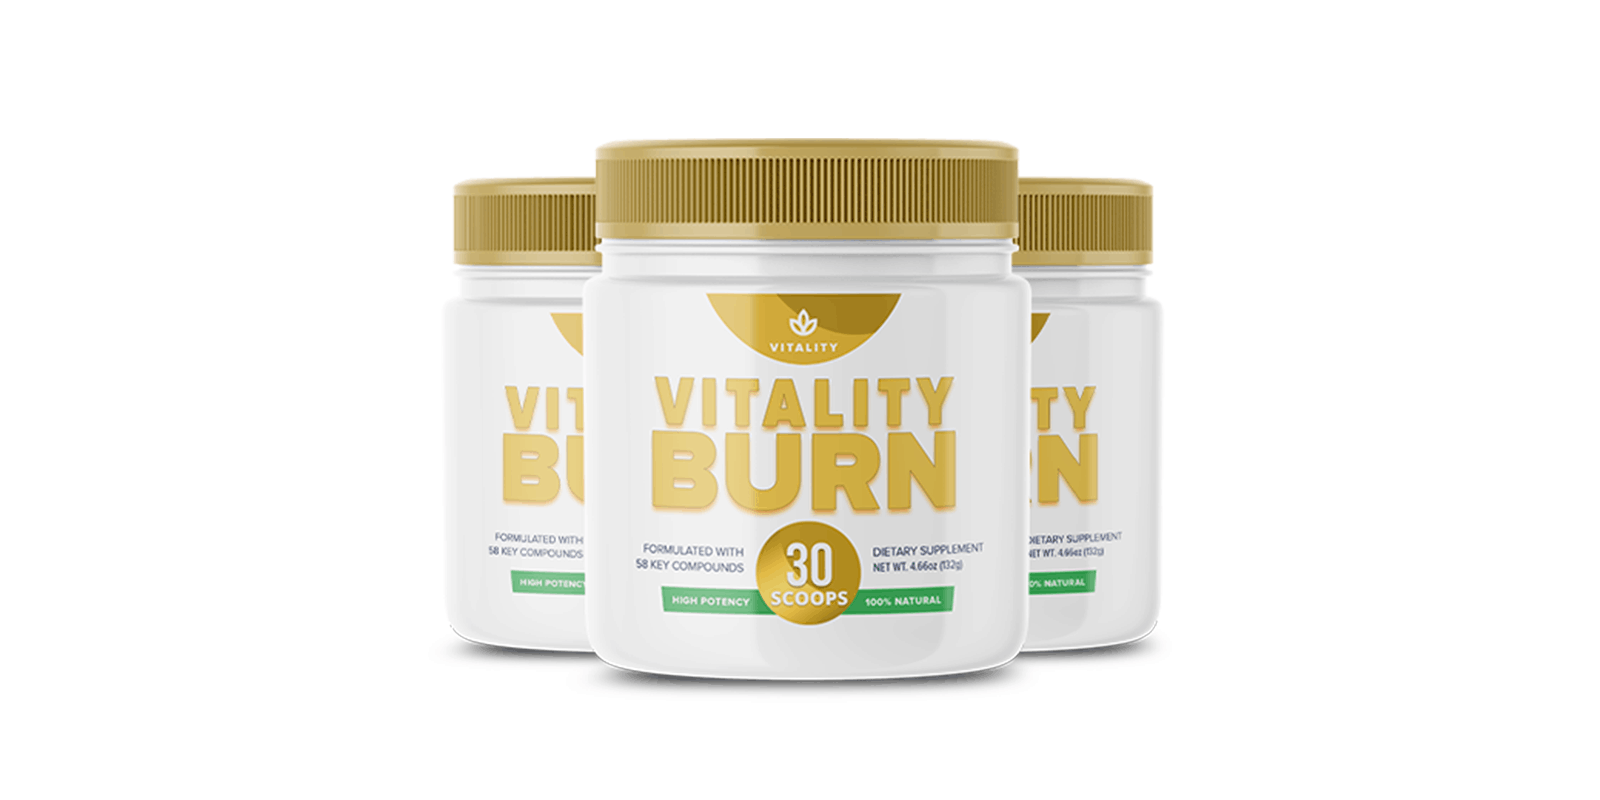 vitality burn supplement review